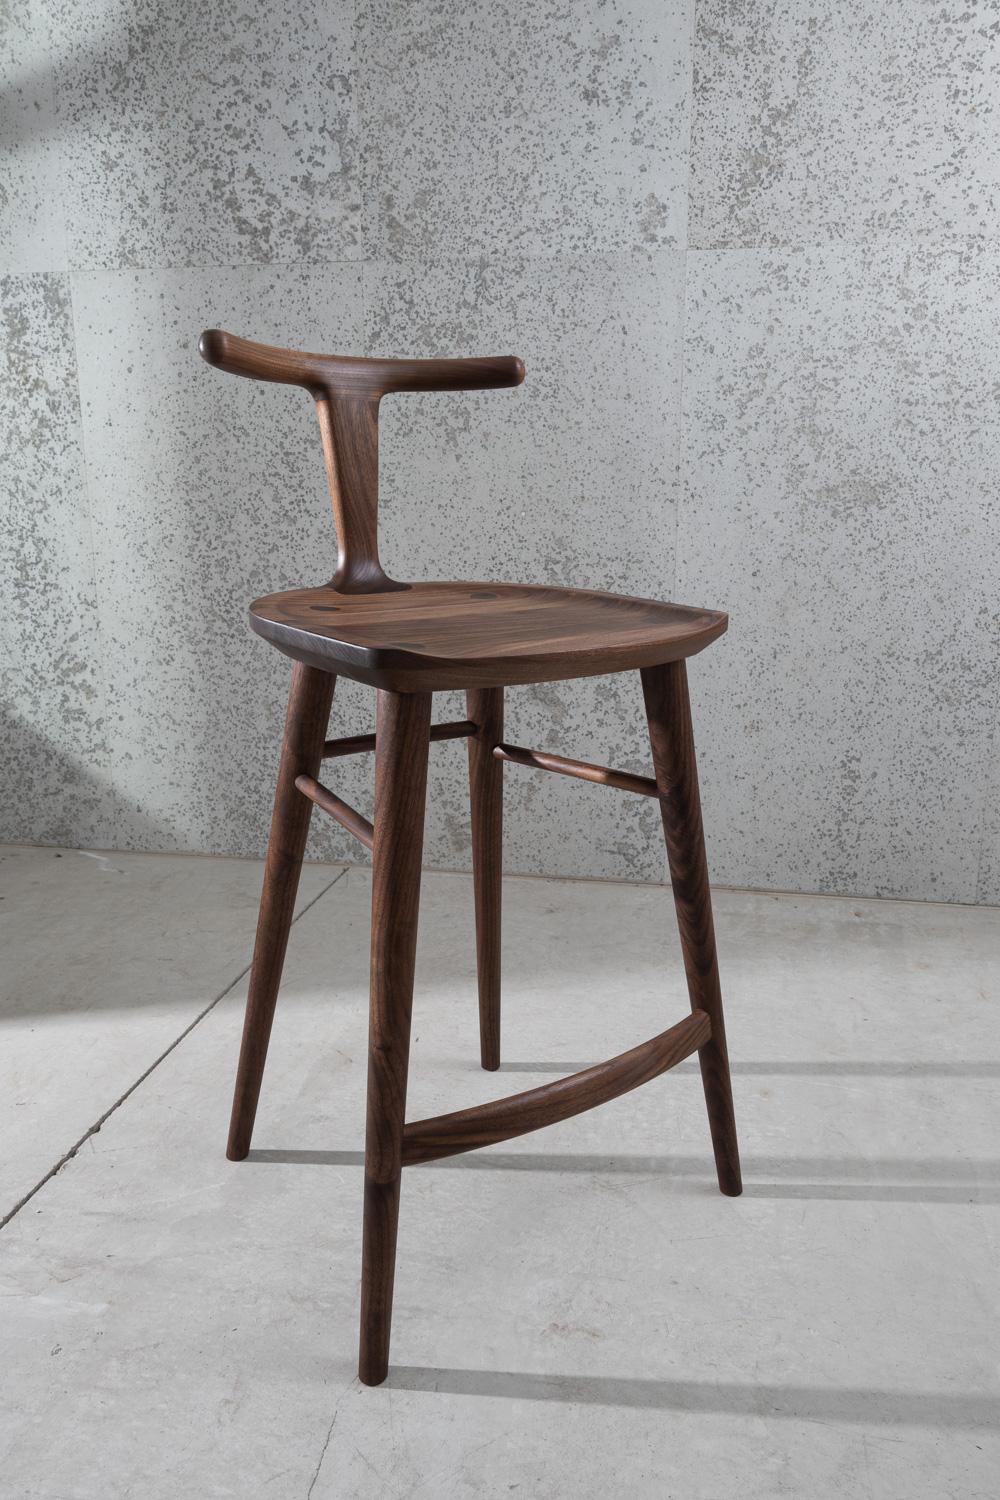 This bar stool, designed by Justin Nelson for Fernweh Woodworking, evolved out of the Oxbend dining chair. The Oxbend collection was born from a desire to create seating that is comfortable, organic, and elegant in its simplicity. This Oxbend stool